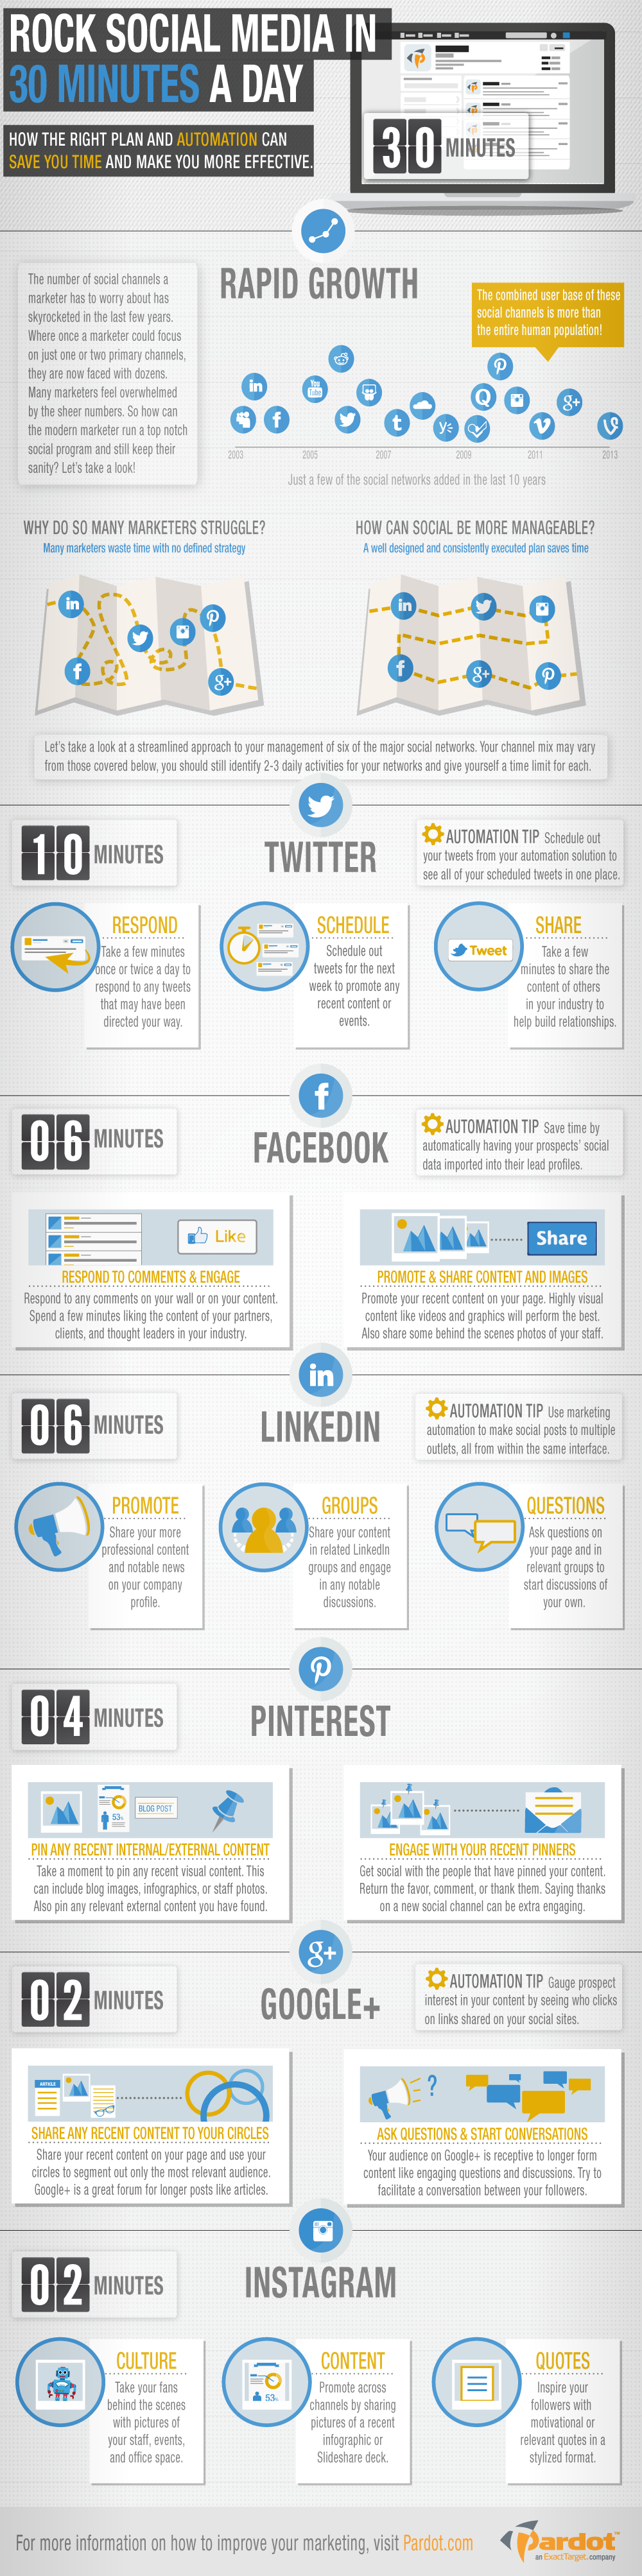 30-minute-social-media-infographic